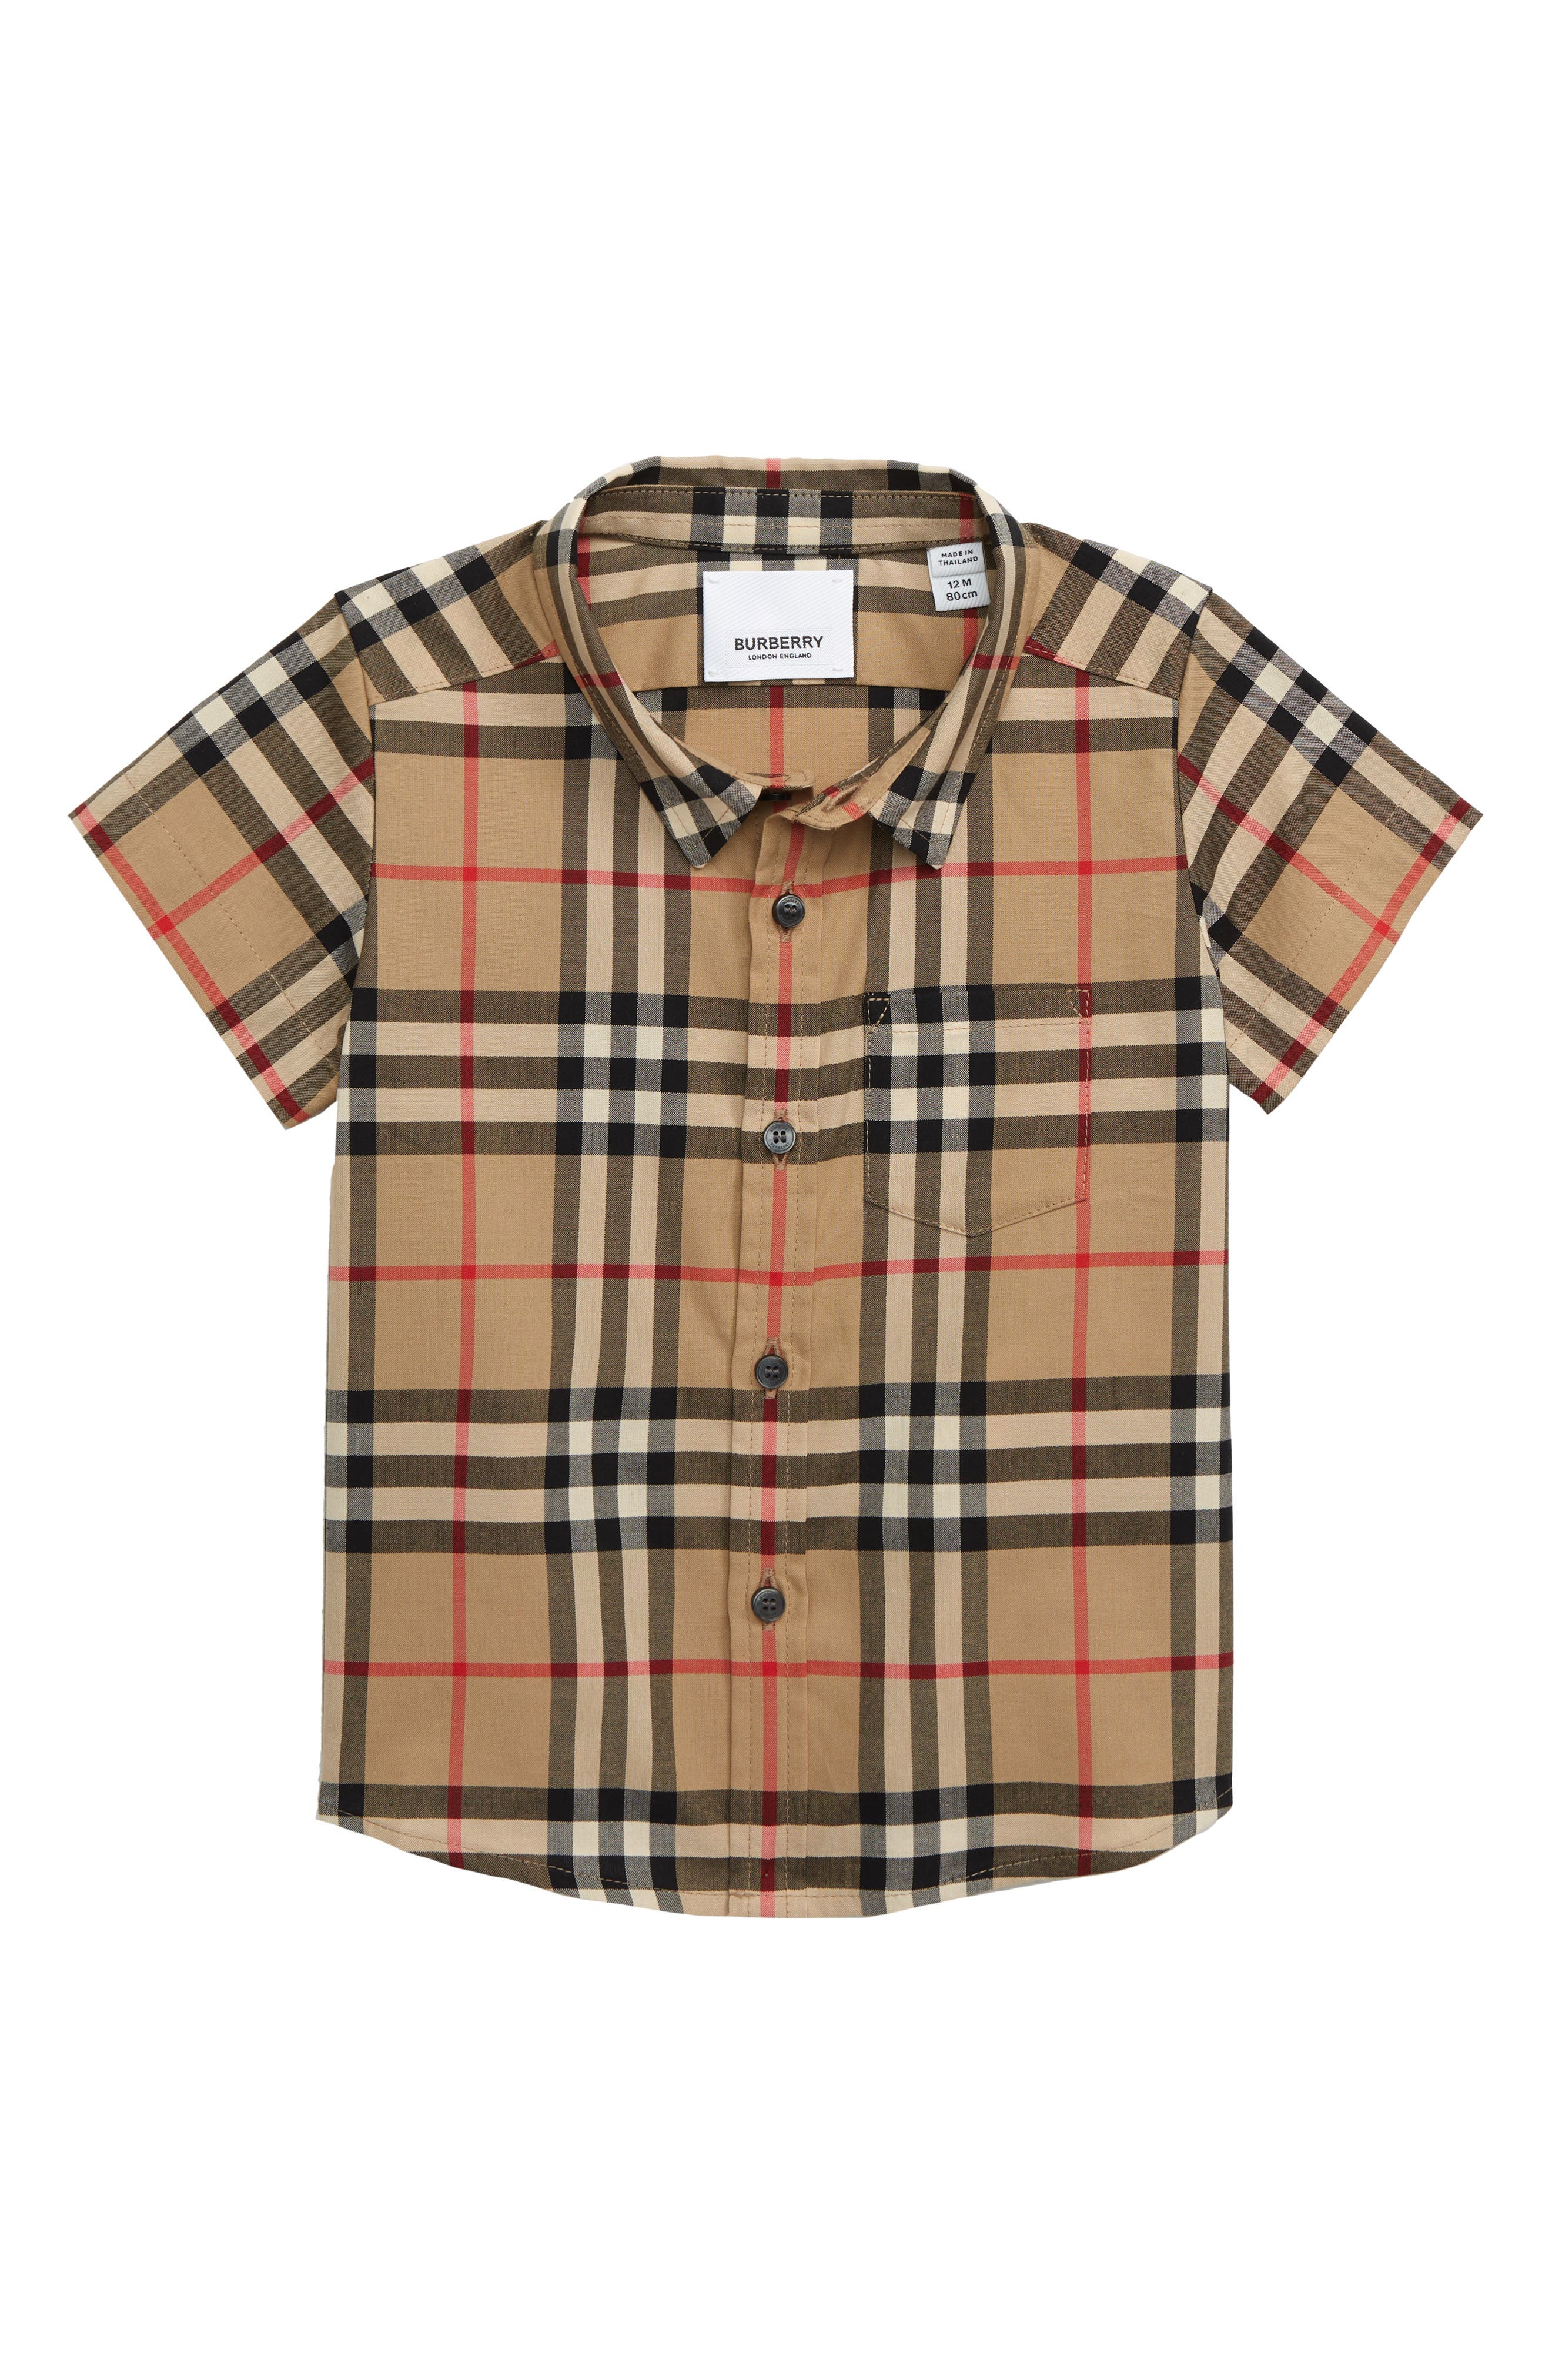 burberry baby clothes online